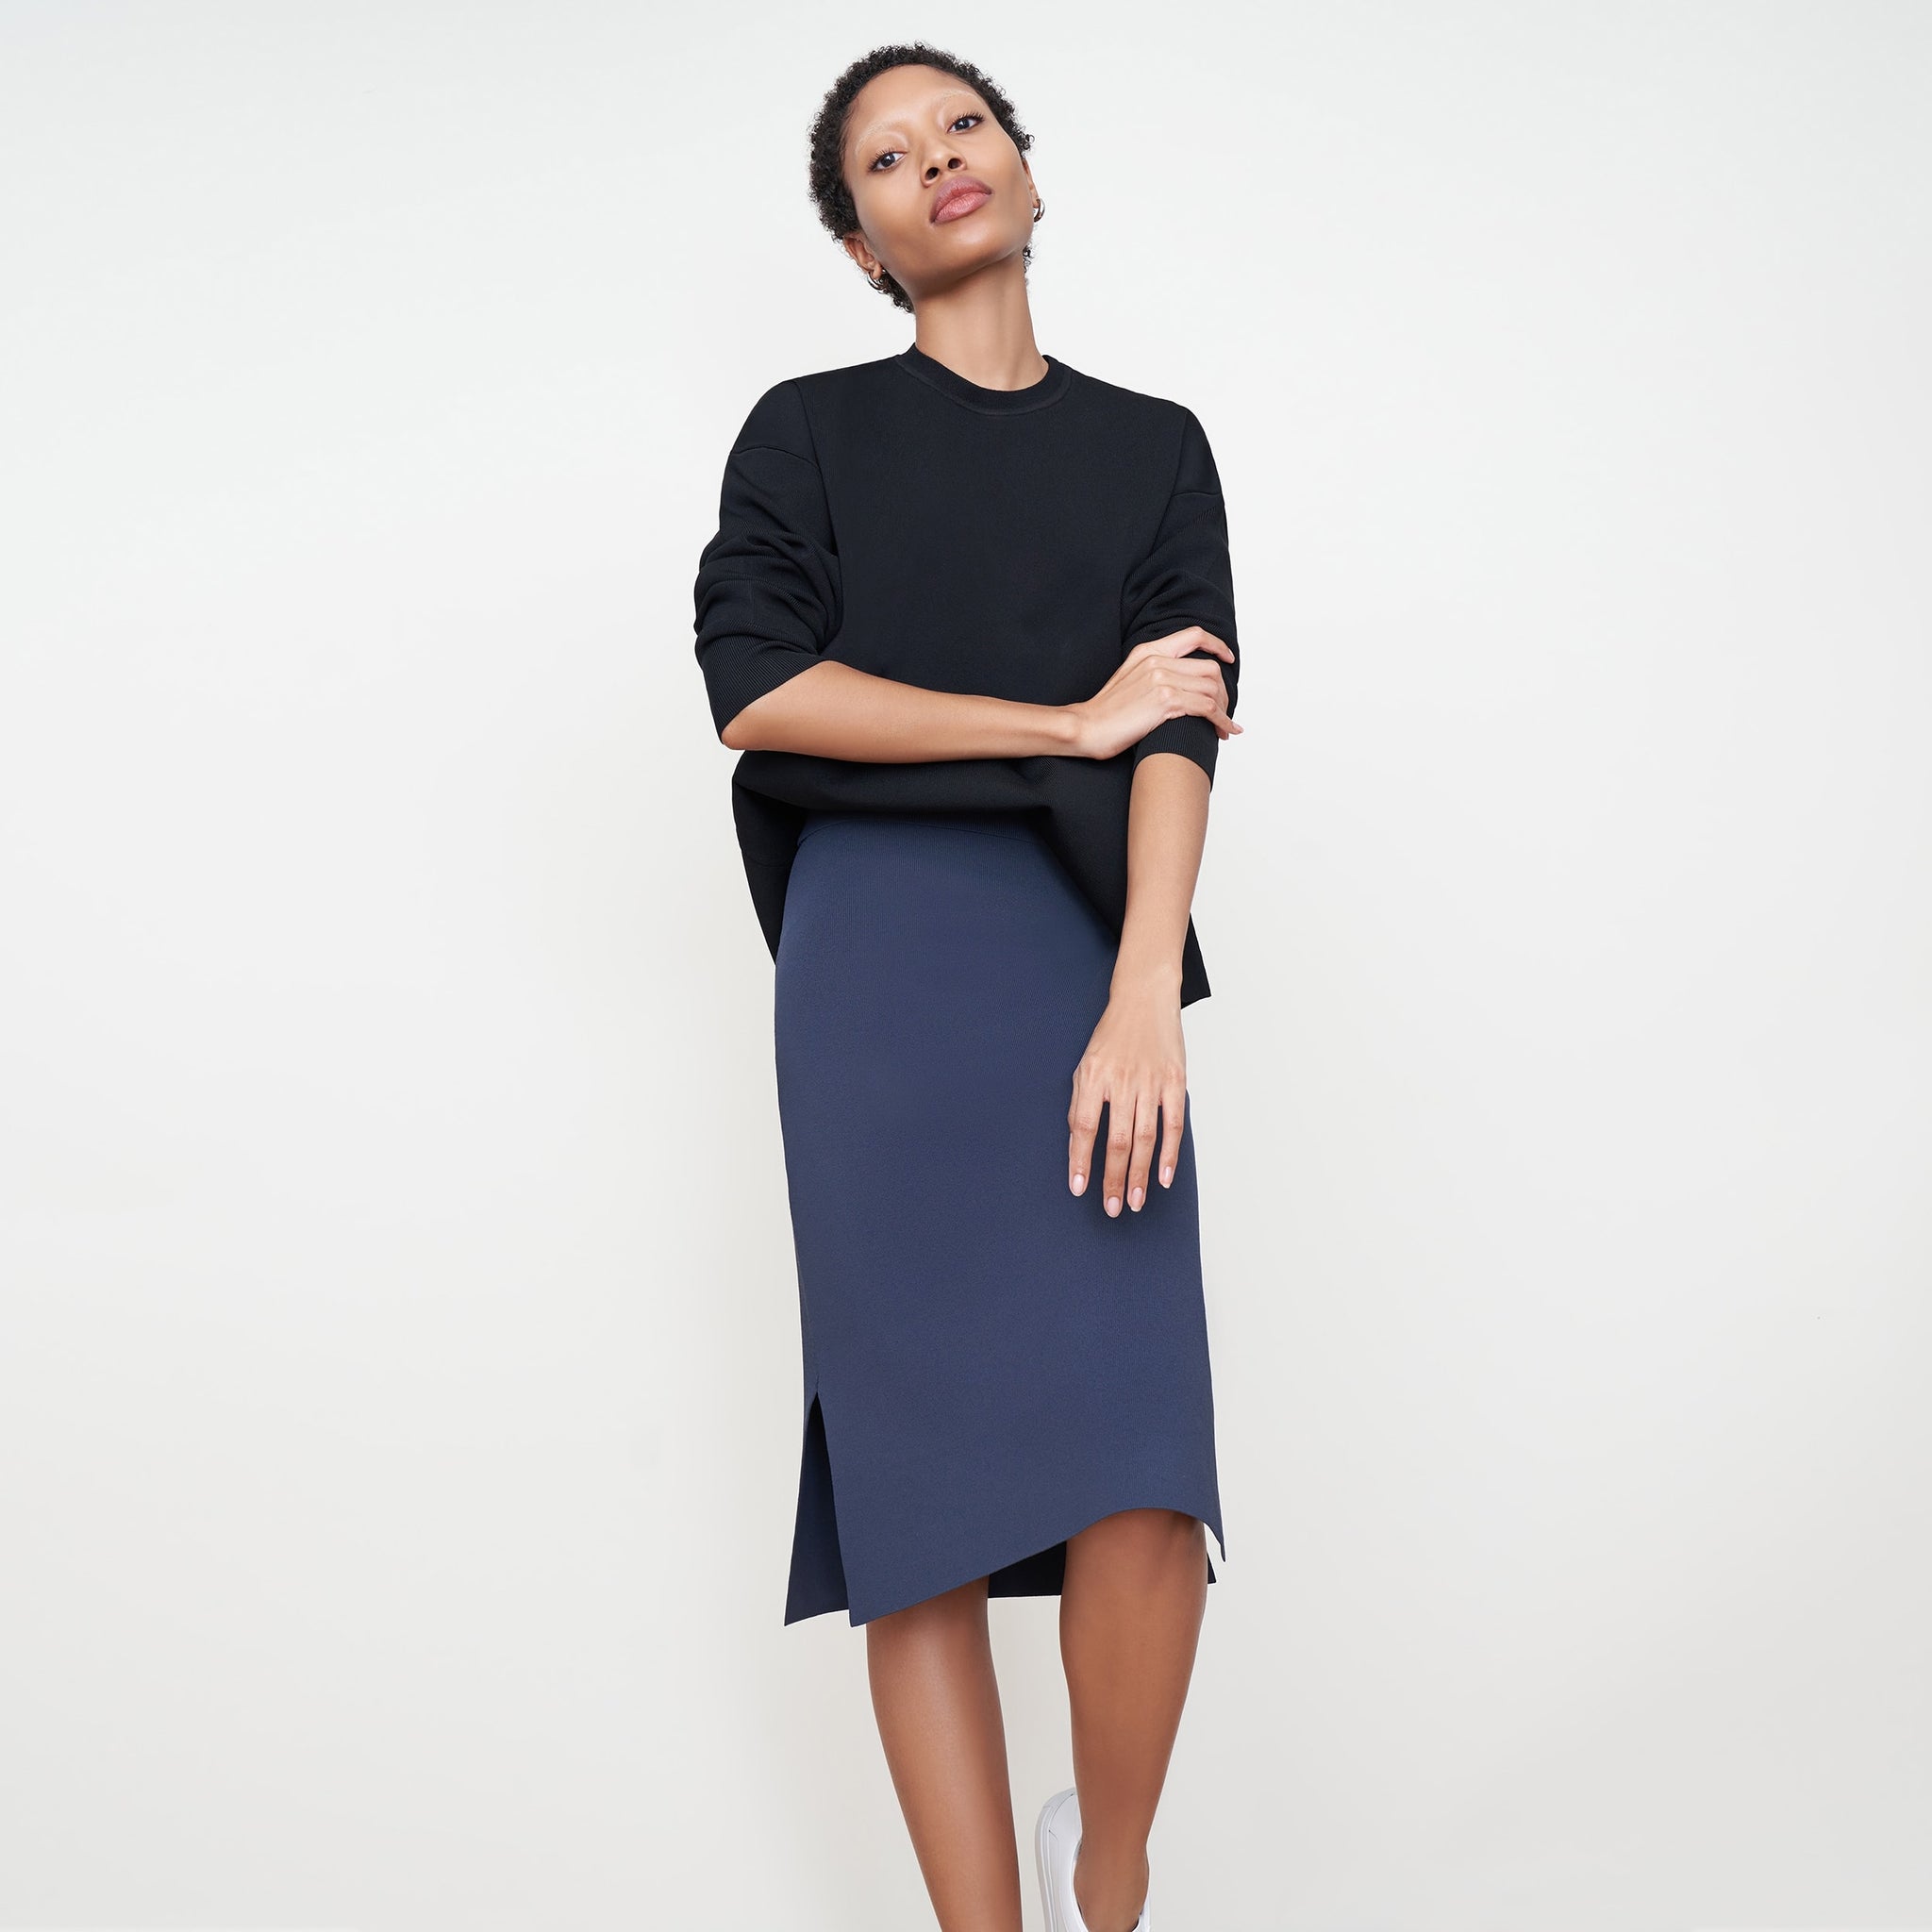 Front image of a woman standing wearing the Harlem skirt in jardigan knit in Baltic Blue